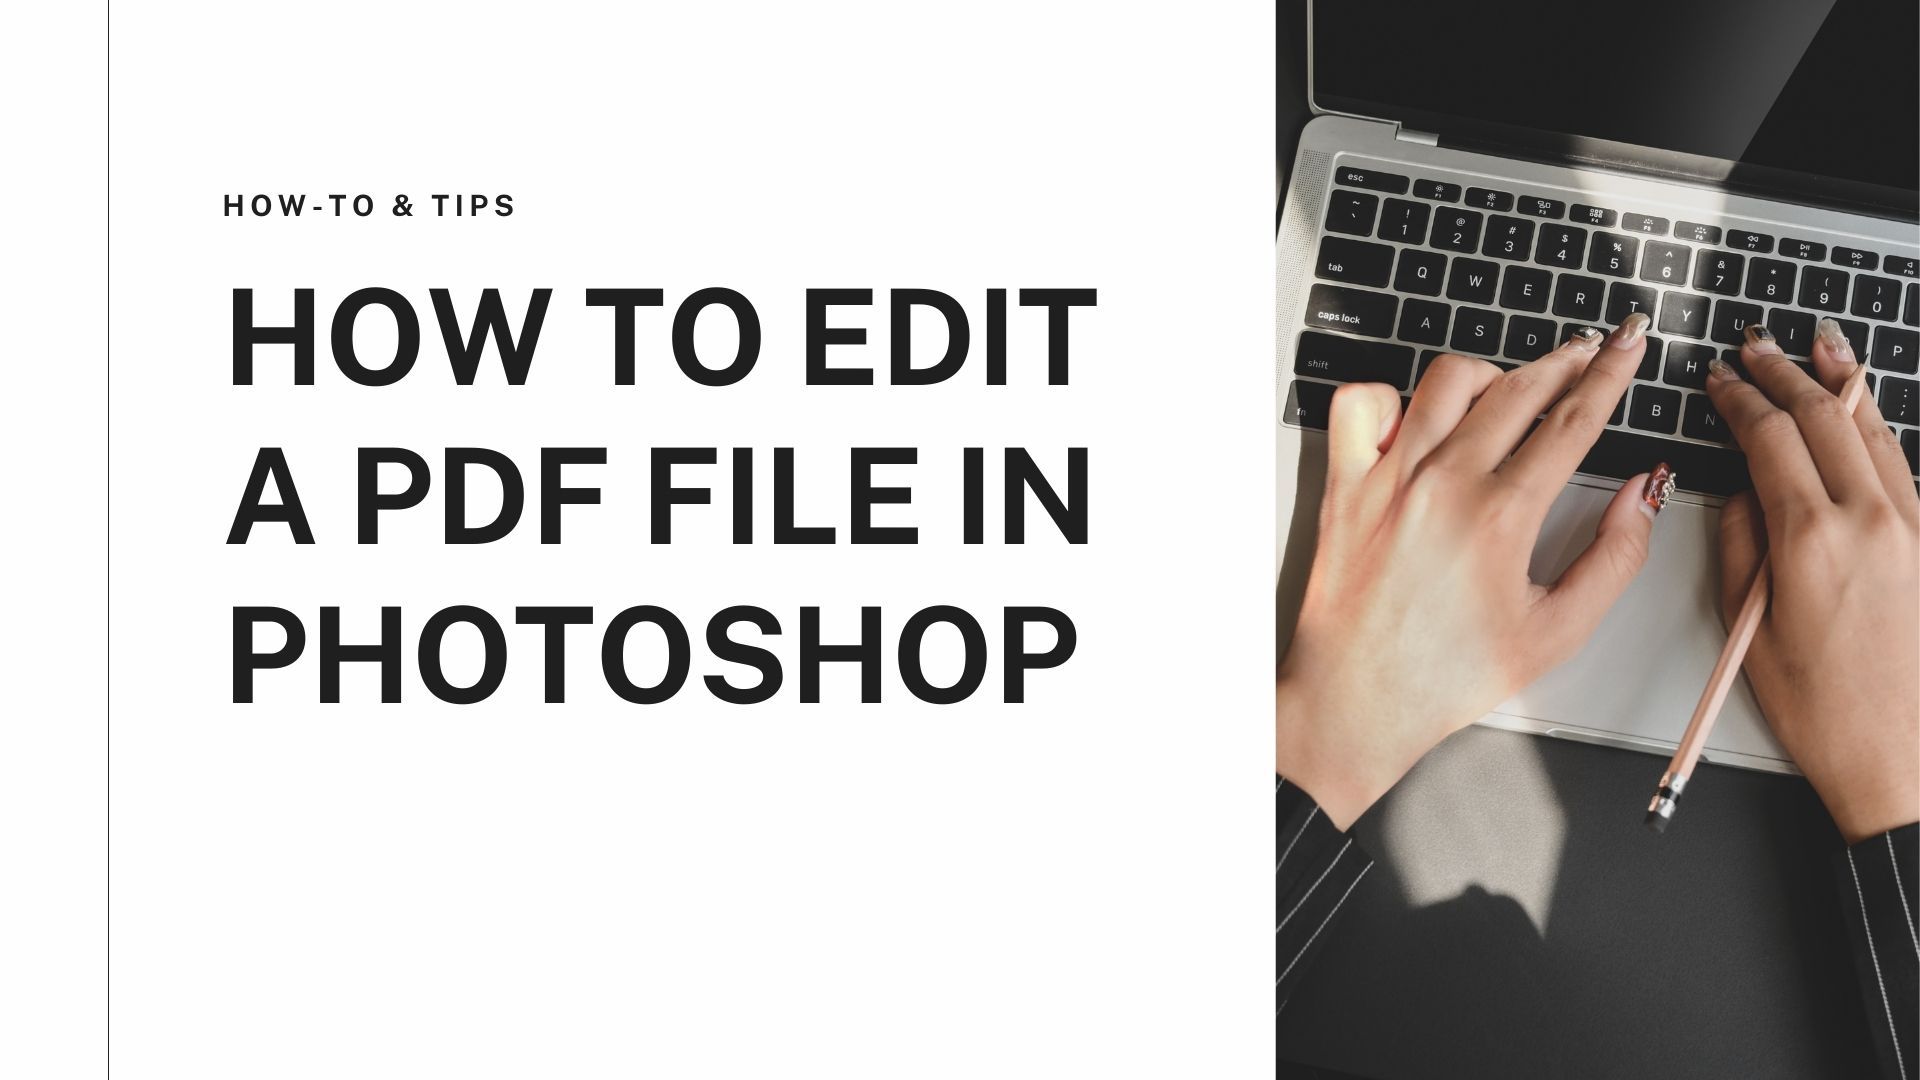 How to edit a PDF file in Photoshop.jpg